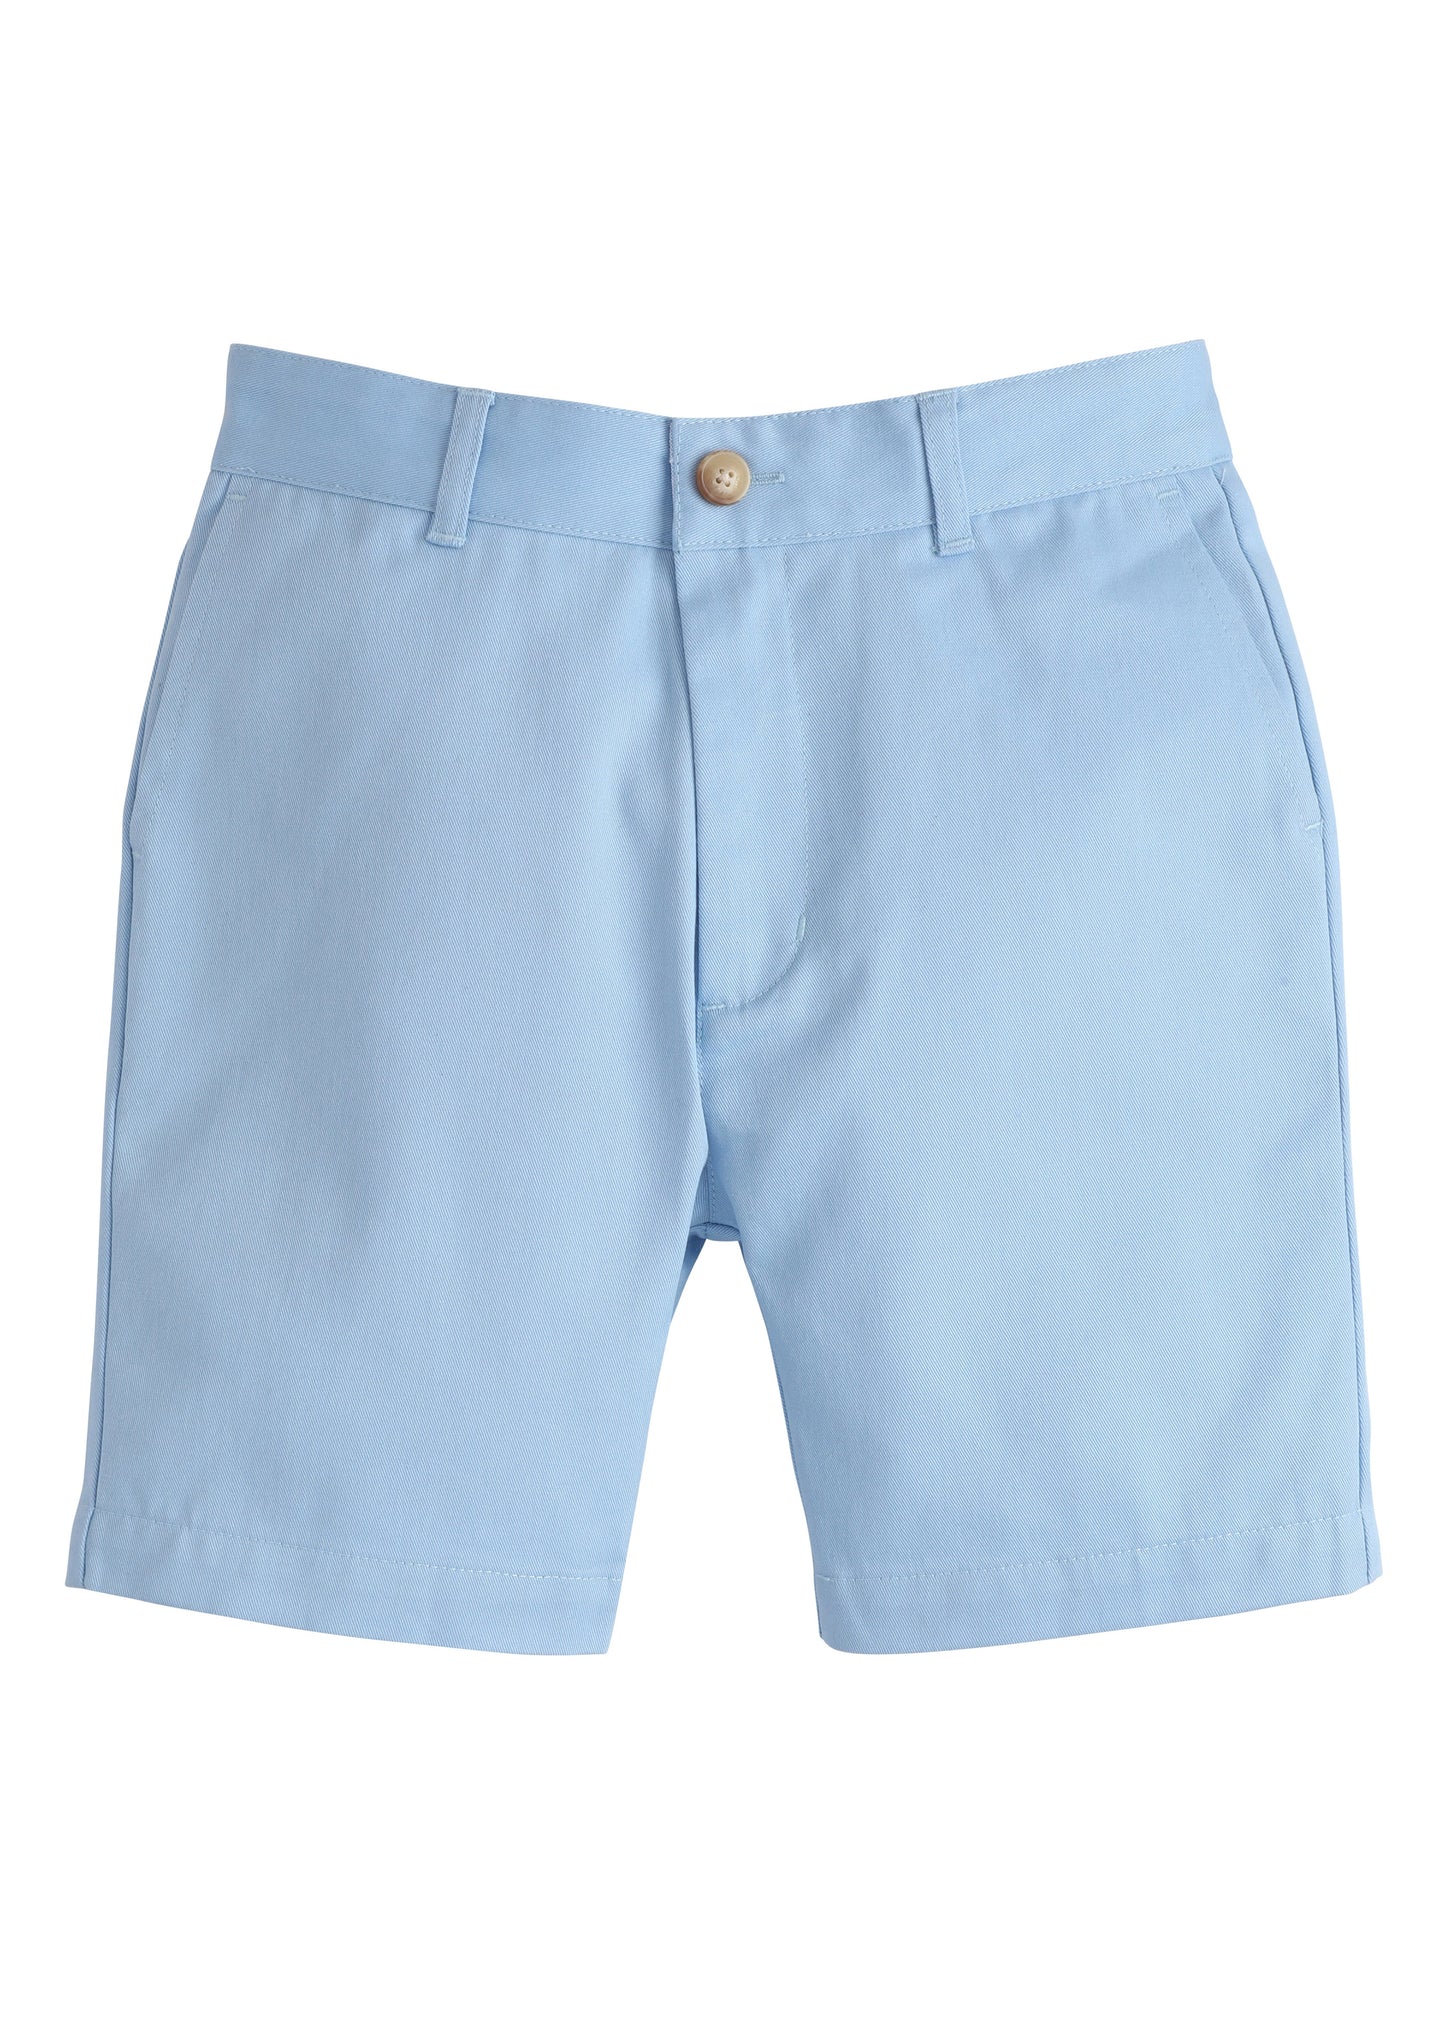 Classic Short in Light Blue Twill by Little English